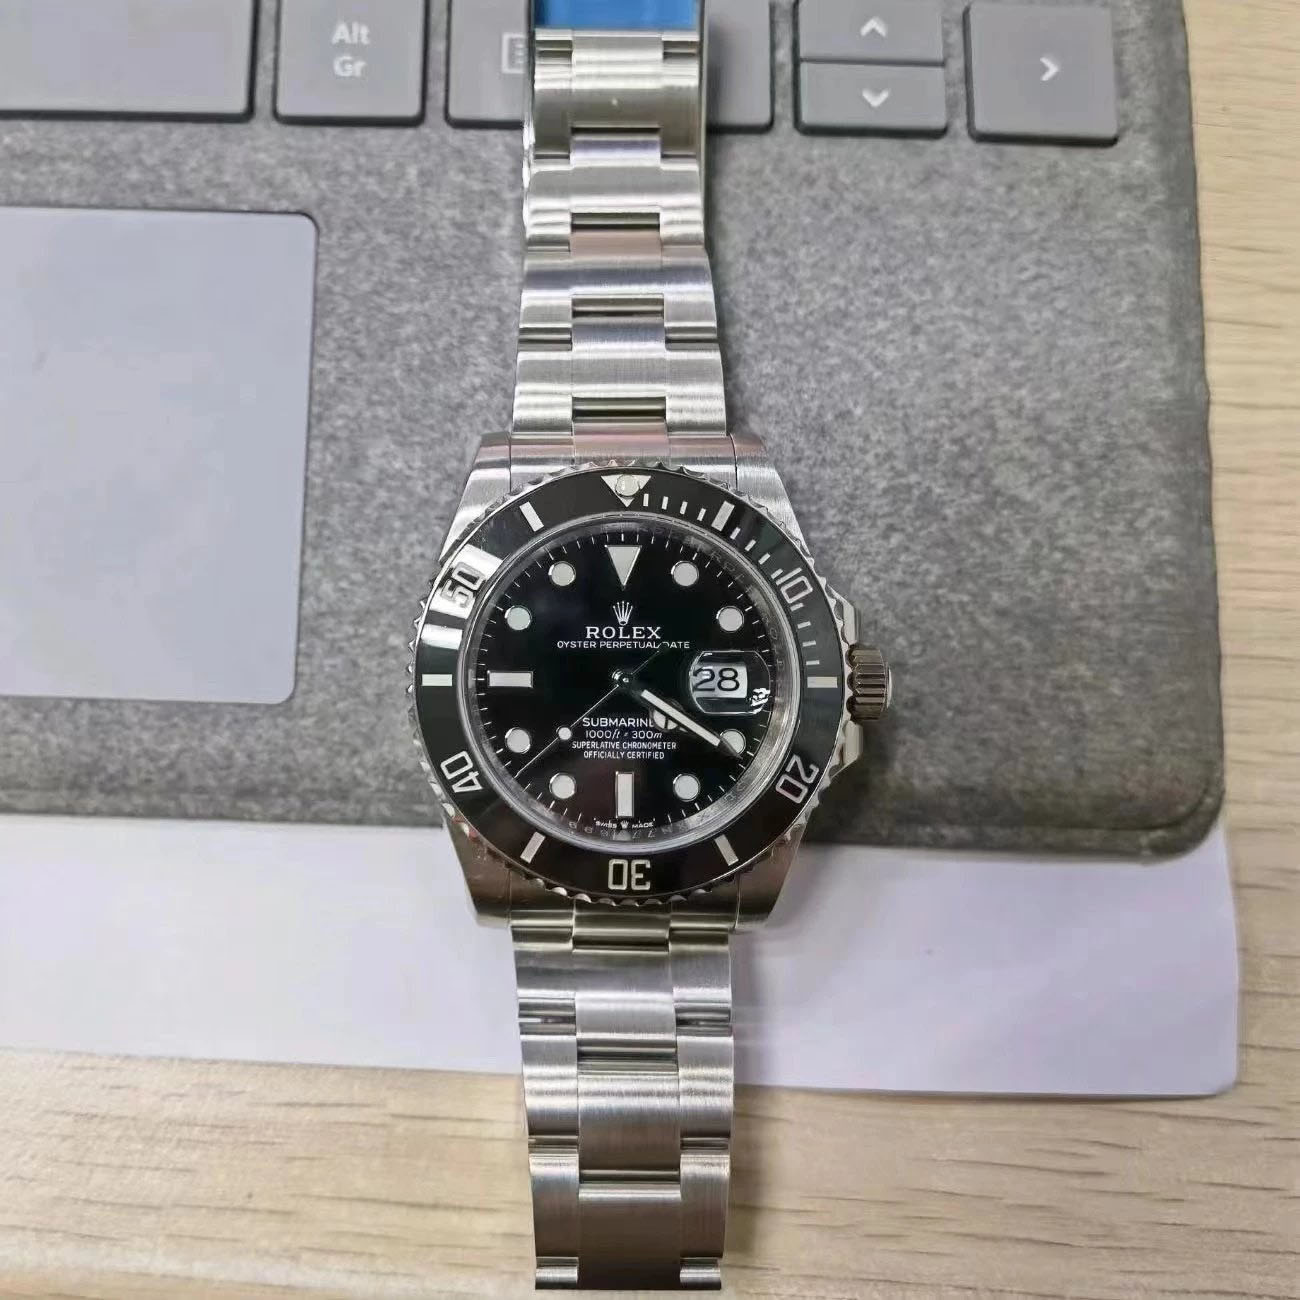 Rolex 1:1 Super Clone Submariner 3130 Clean Factory 114060-0002 Watch photo review